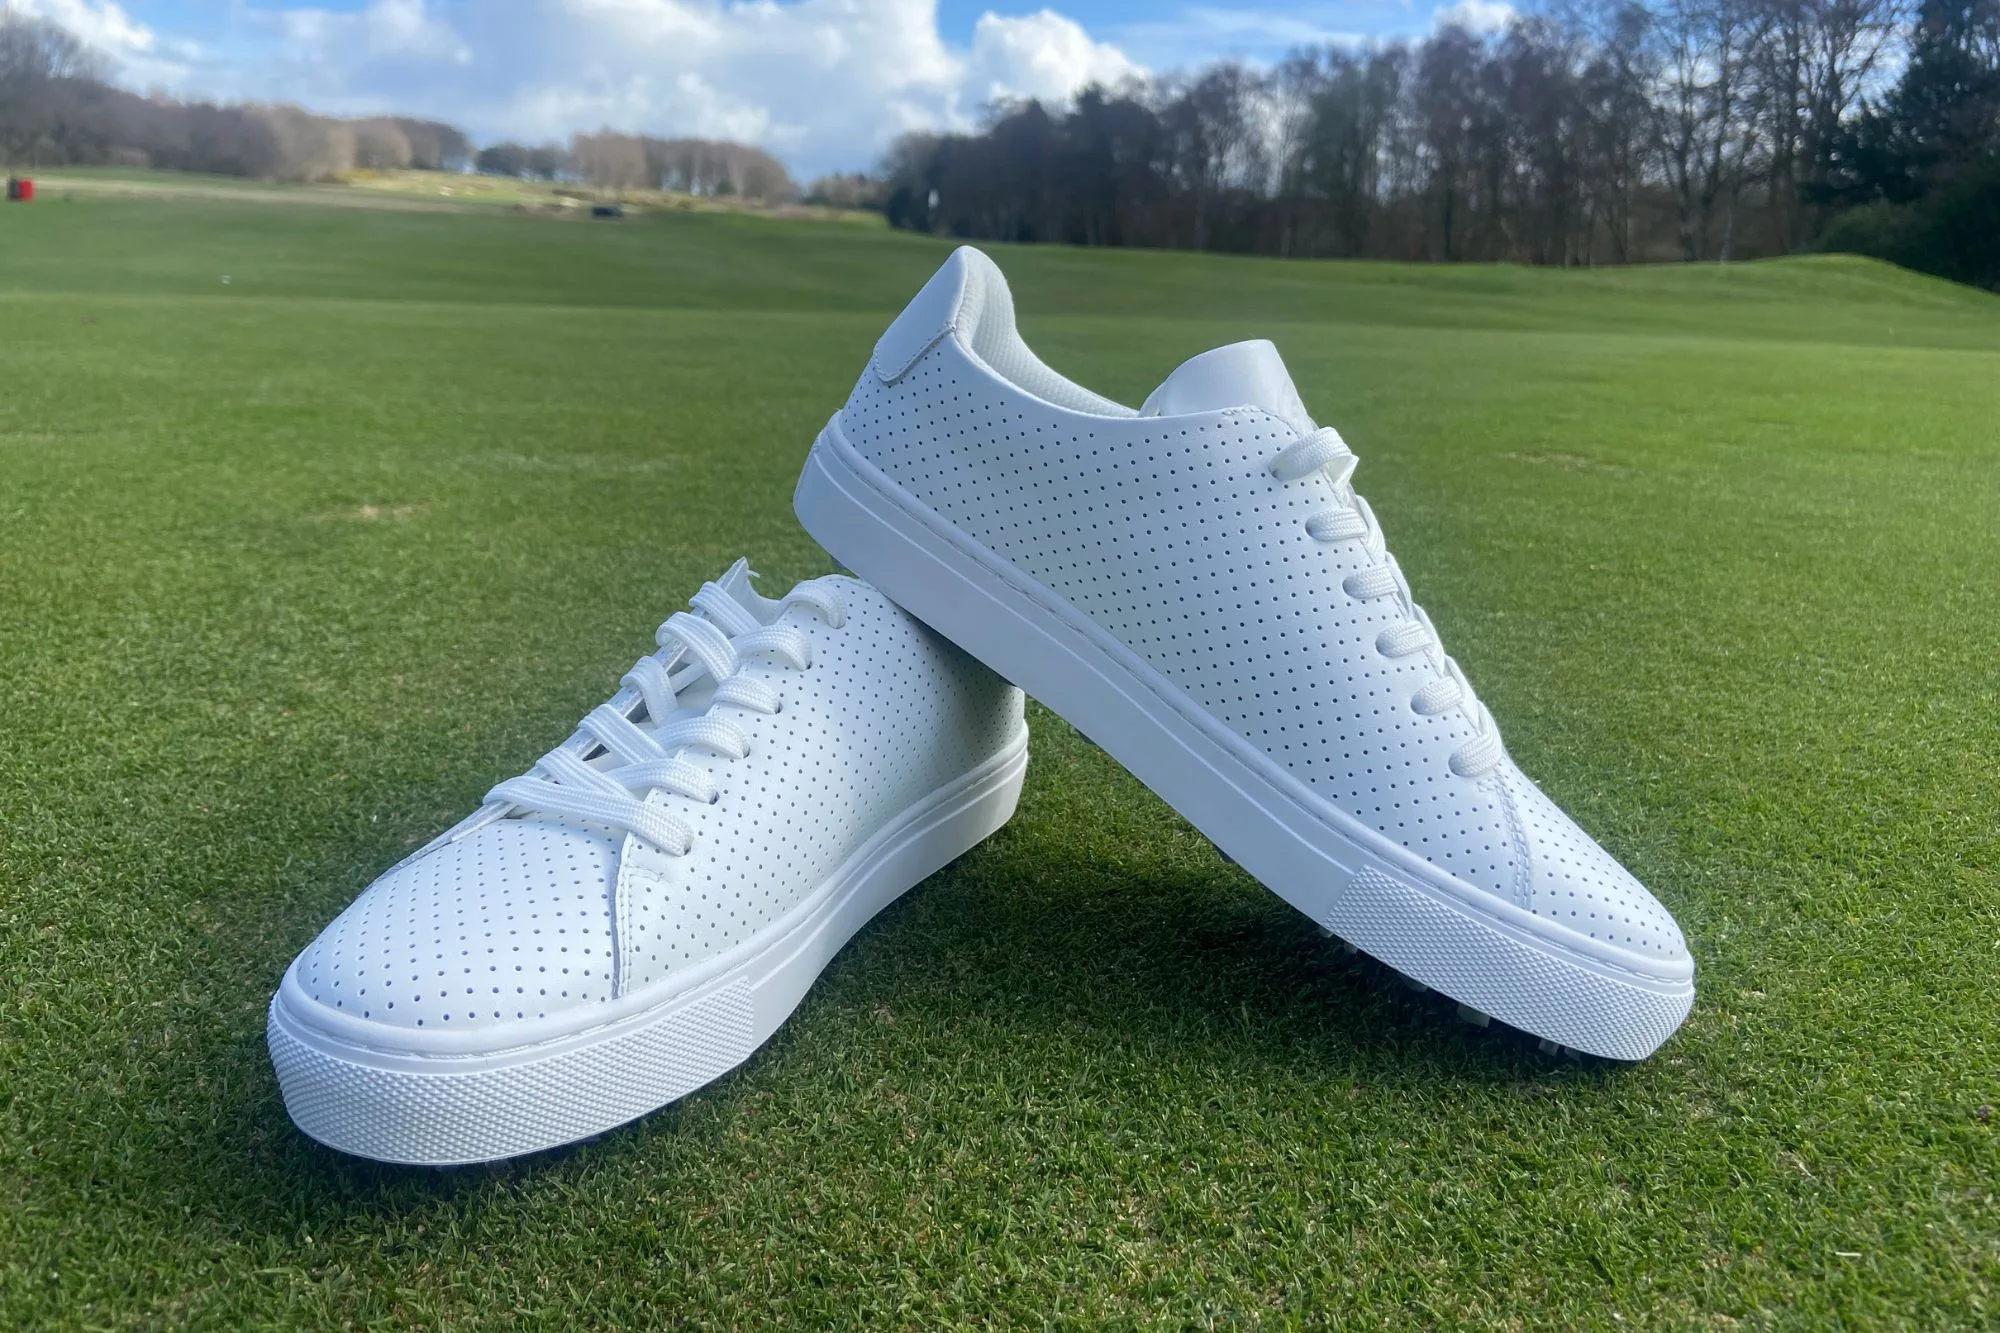 G Fore Women's Perforated Durf golf shoes review